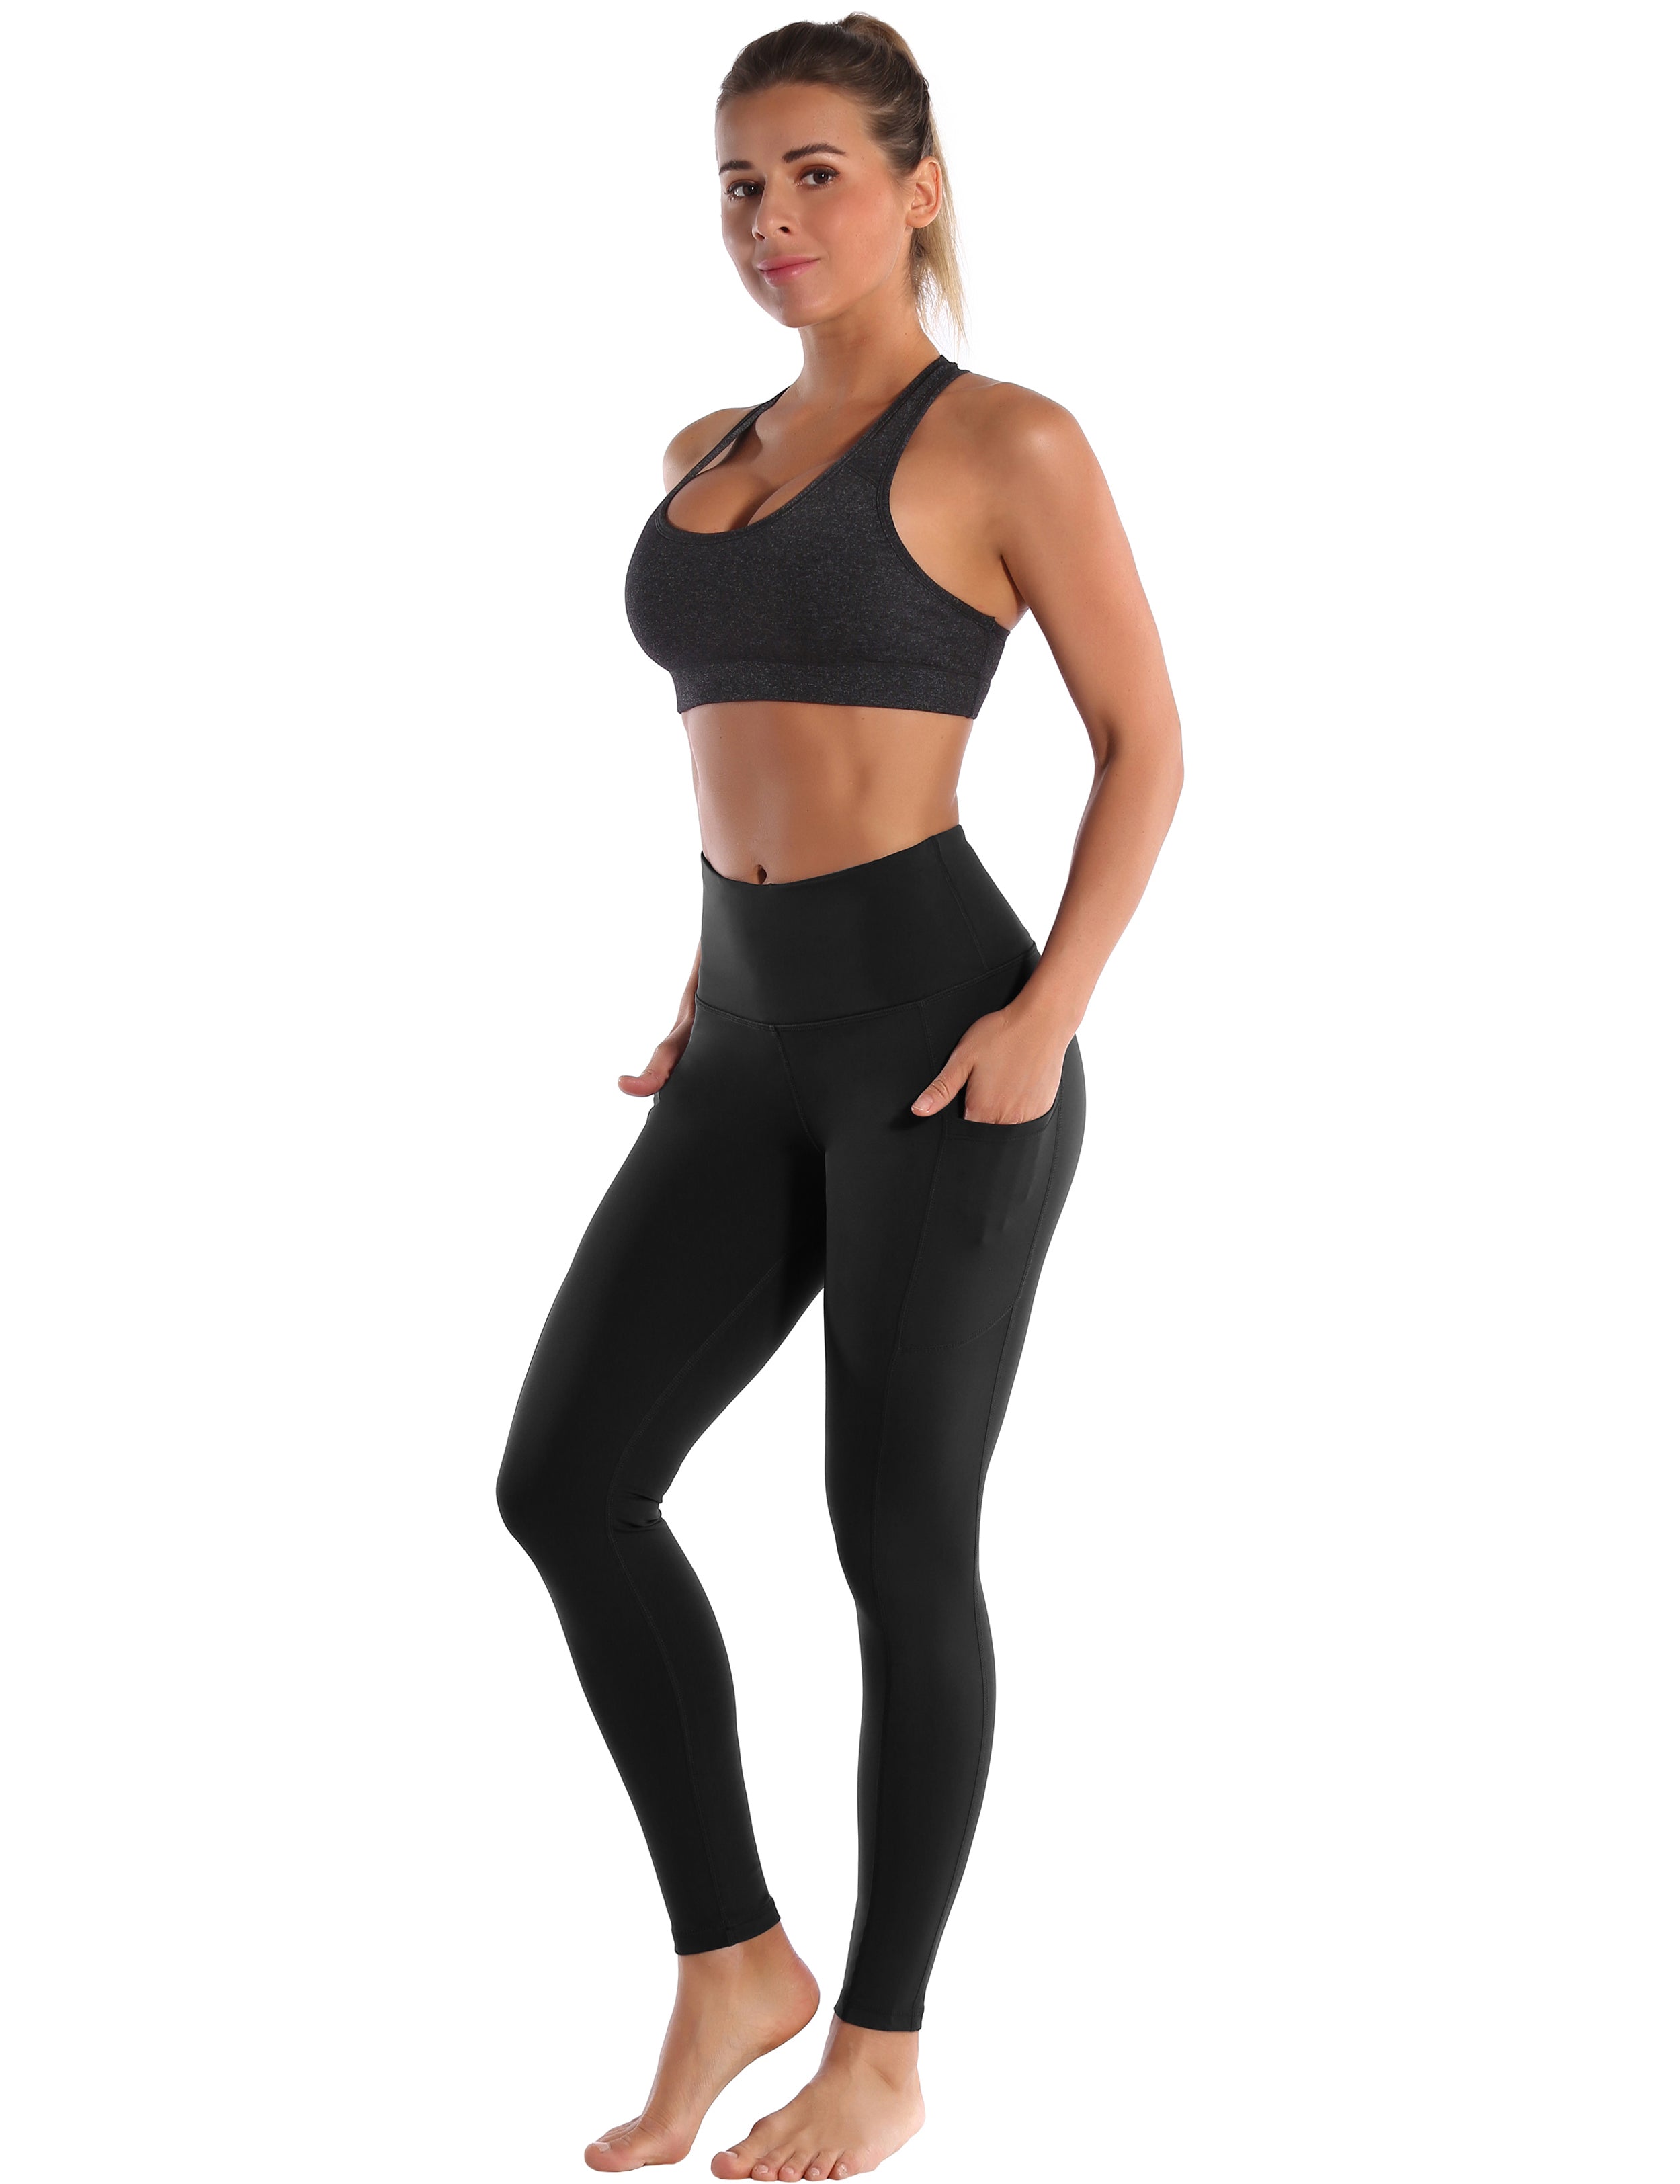 Hip Line Side Pockets Gym Pants black Sexy Hip Line Side Pockets 75%Nylon/25%Spandex Fabric doesn't attract lint easily 4-way stretch No see-through Moisture-wicking Tummy control Inner pocket Two lengths